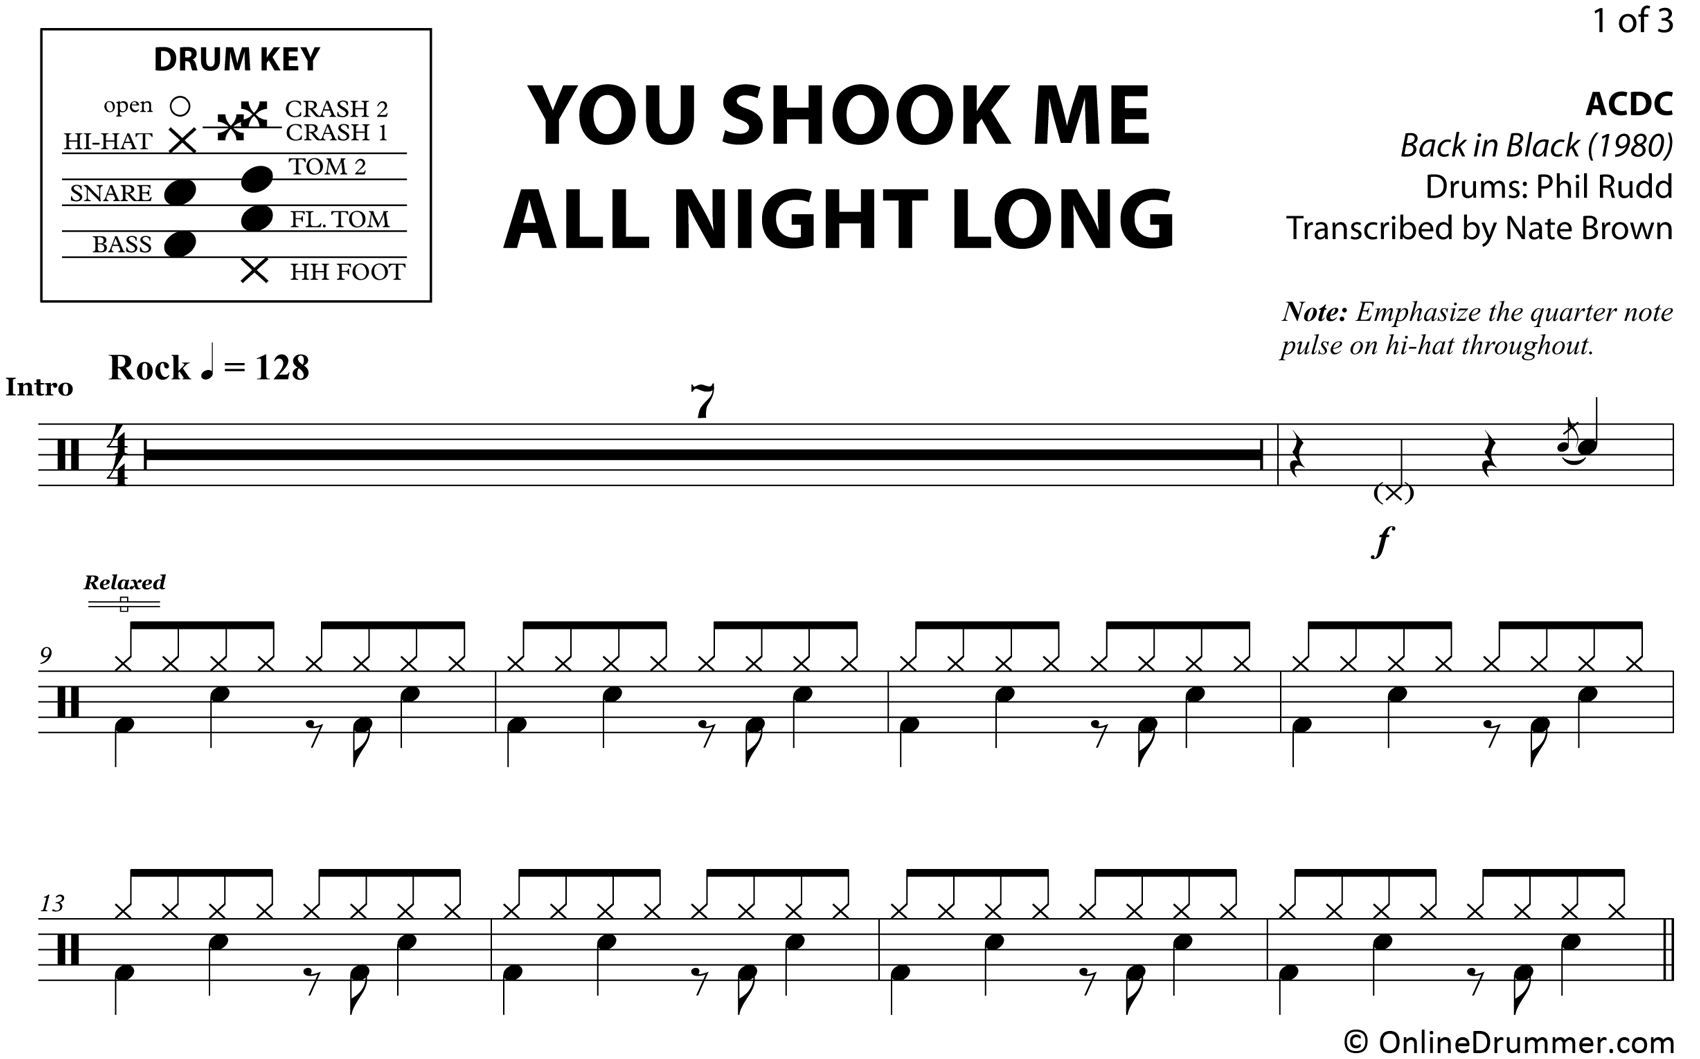 You Shook Me All Night Long - ACDC - Drum Sheet Music